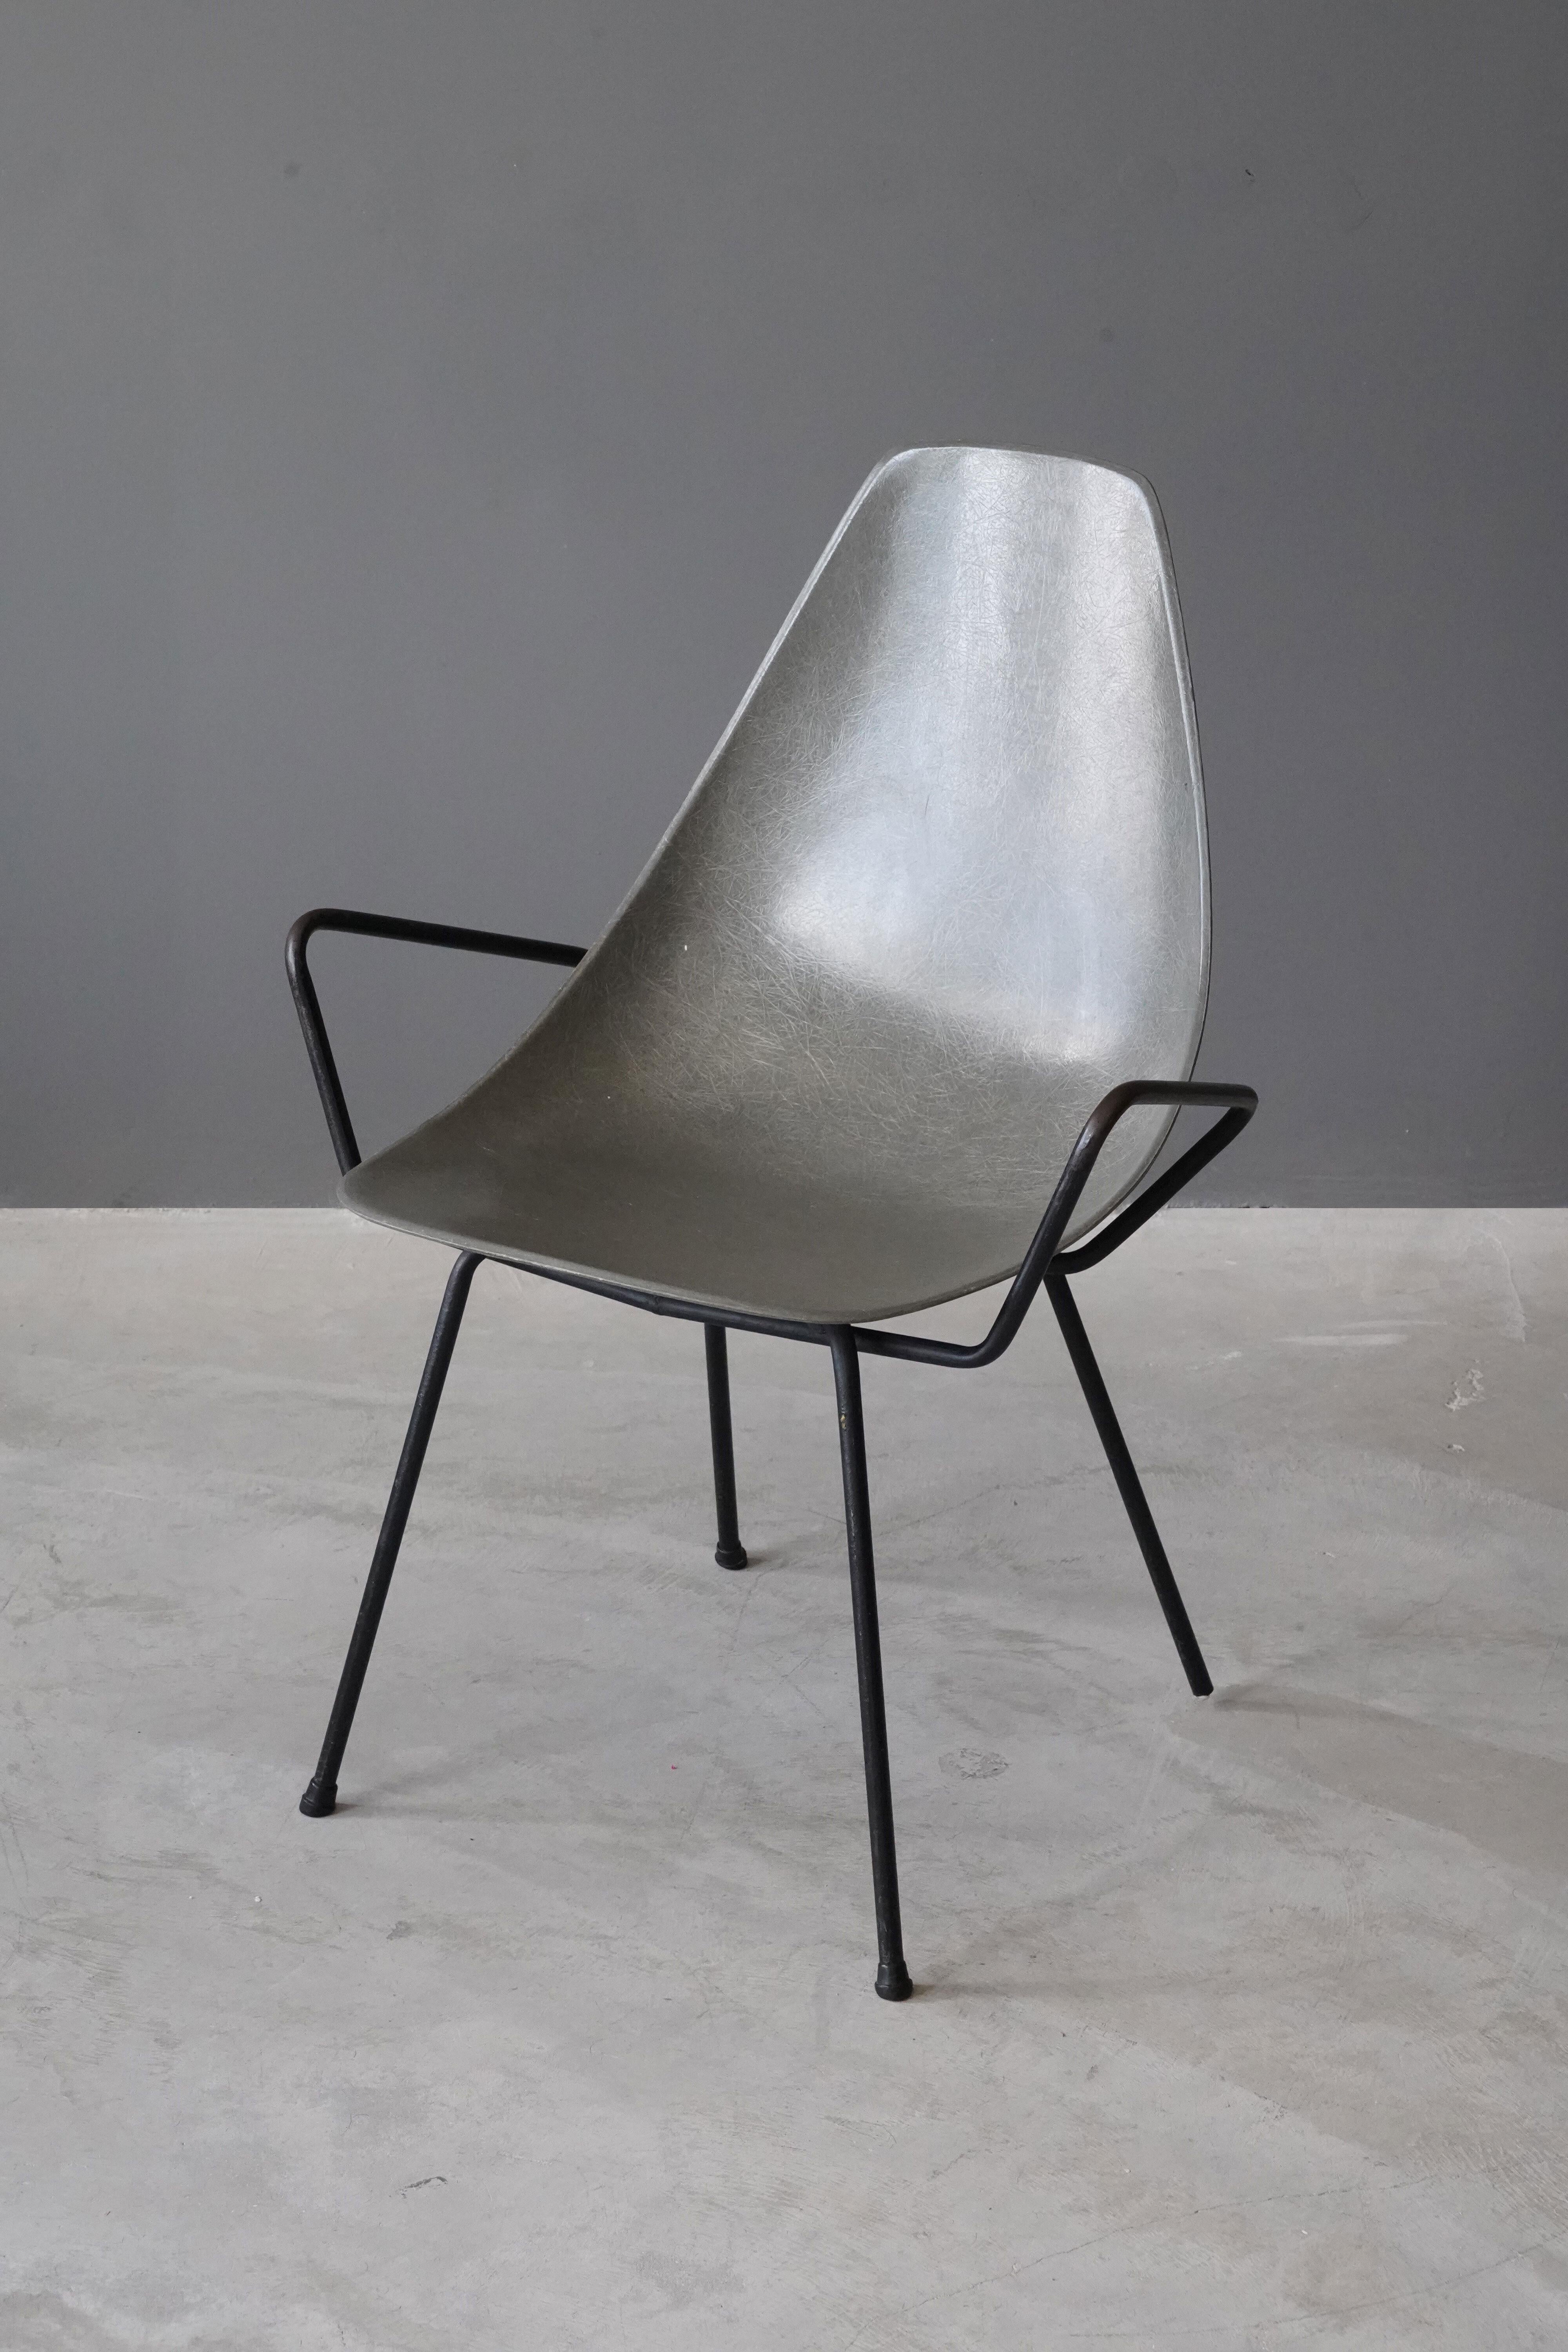 An armchair / side chair by Mel Abitz & Forest Wilson. Executed in fiberglass and lacquered metal.